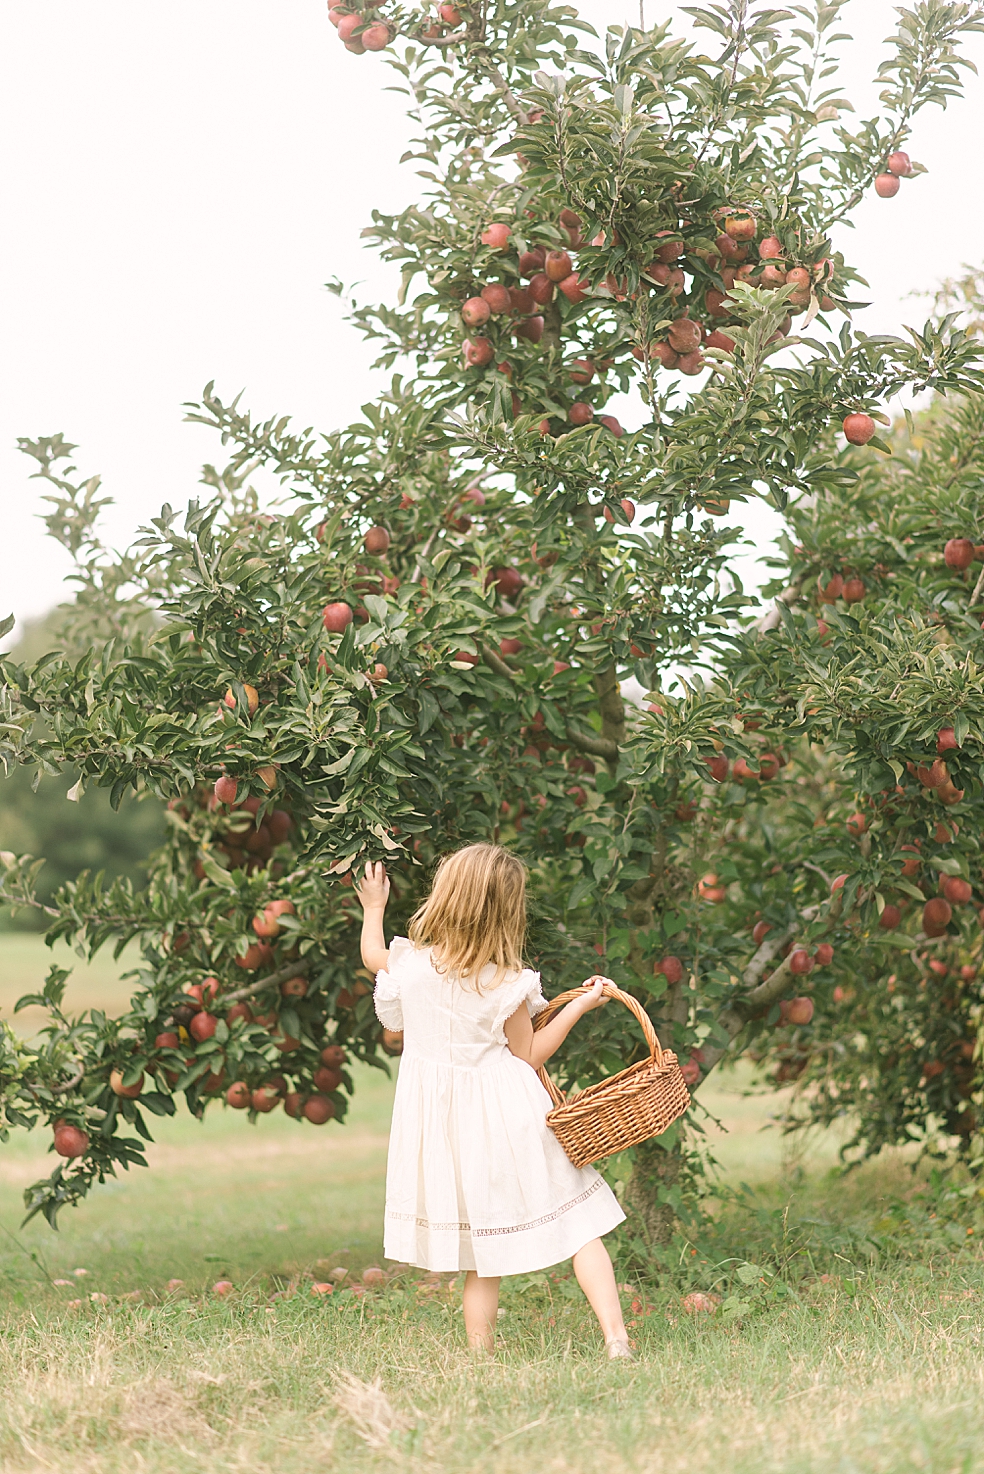 Little girl picking apples in a cream colored dress | Photo by Jessica Lee Photography